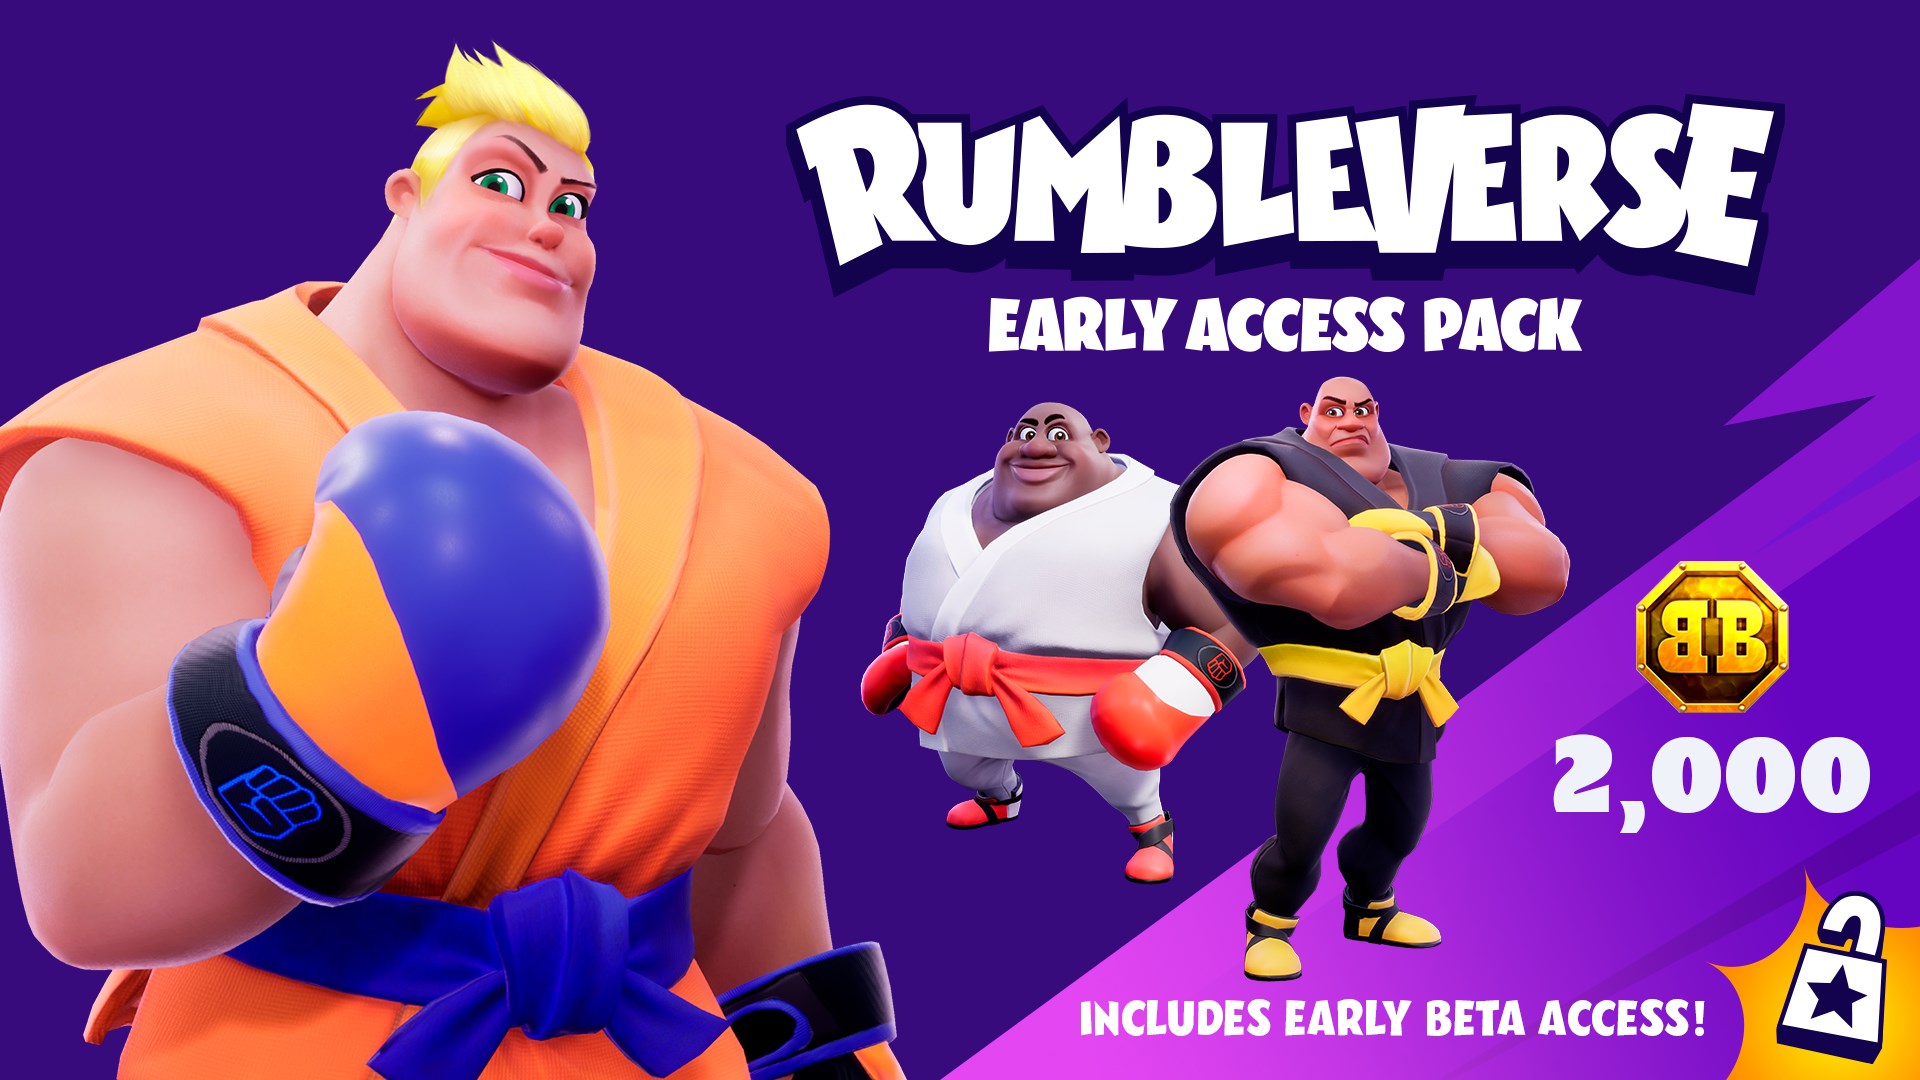 Video For Rumbleverse – Early Access Pack Is Now Available For Digital Pre-order And Pre-download On Xbox One And Xbox Series X|S